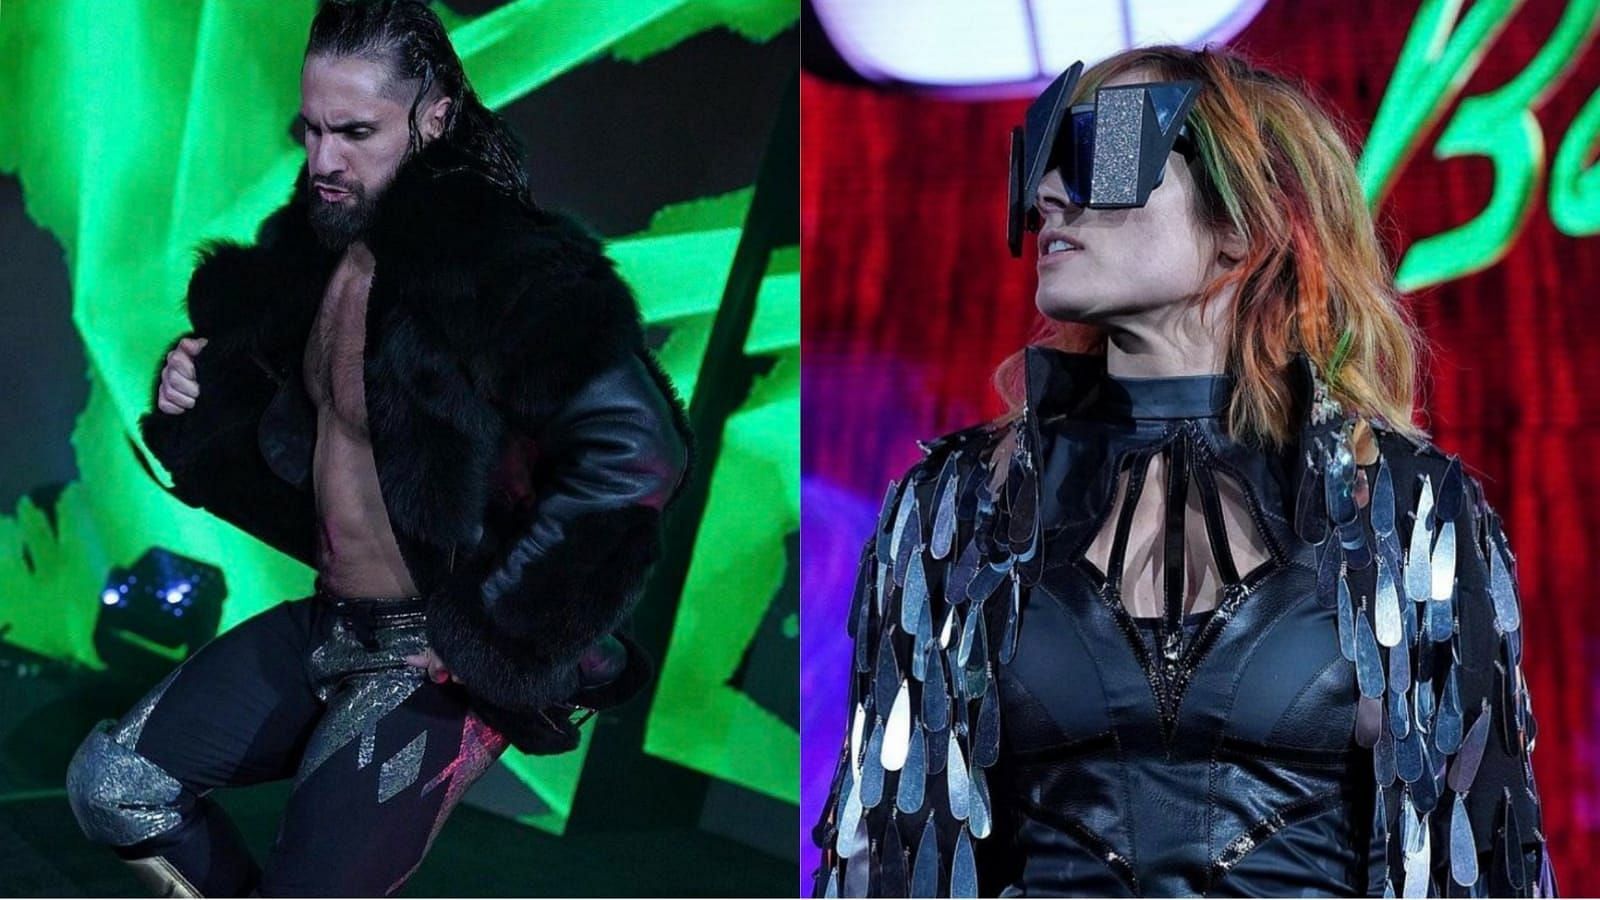 Seth Rollins (L) and Becky Lynch (R) were in action in Tucson!